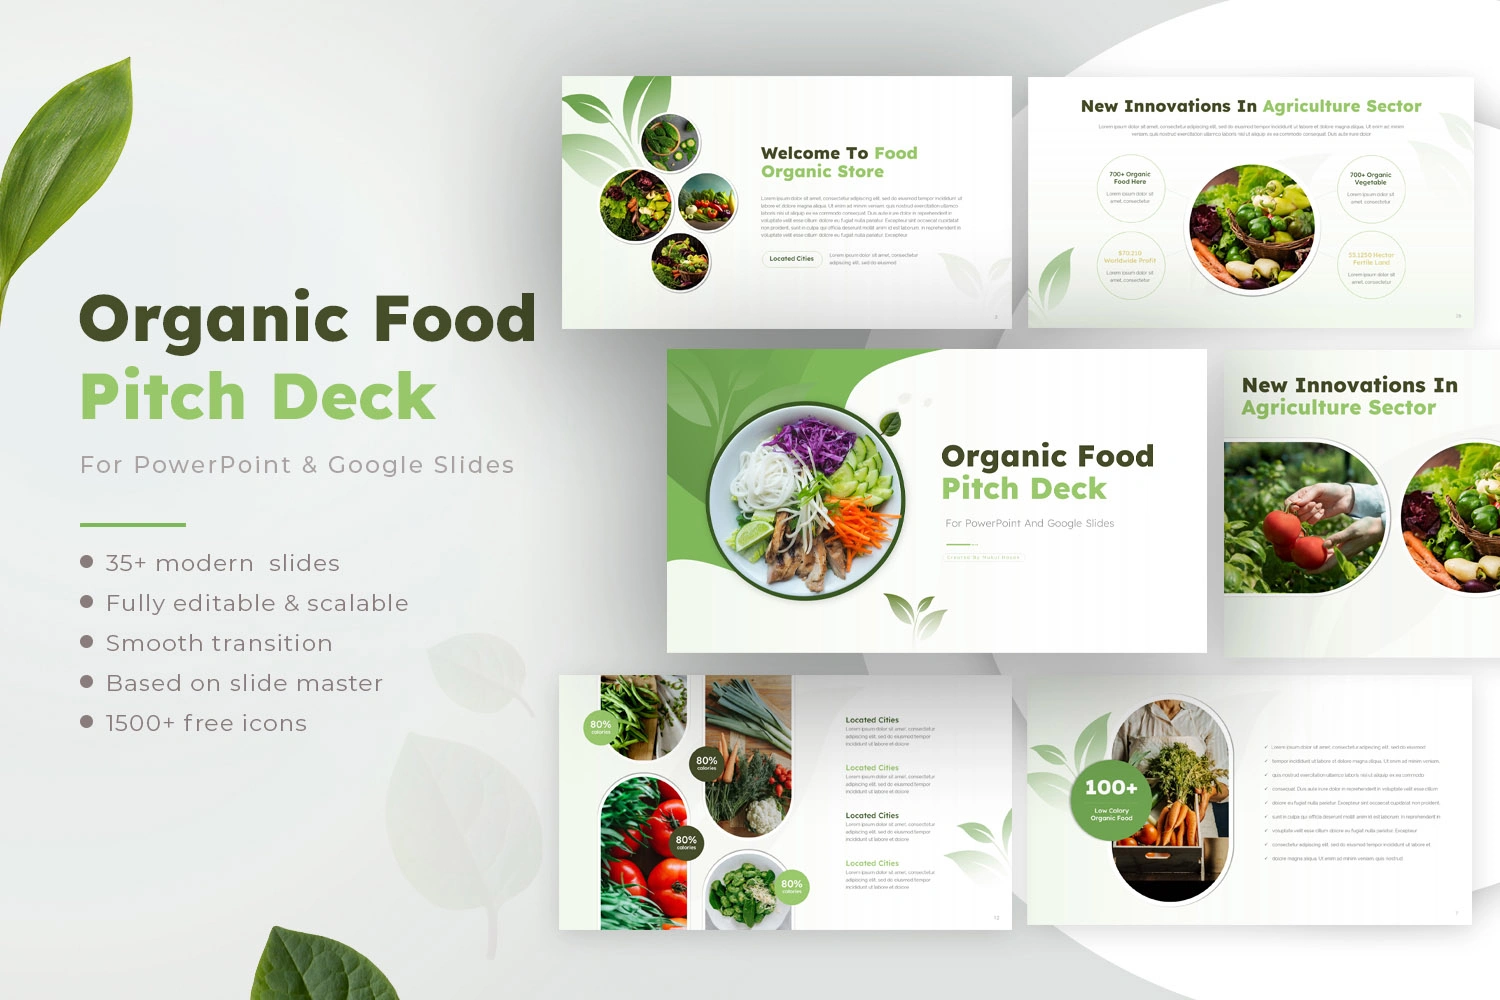 Organic food pitch deck for PowerPoint & Google Slides